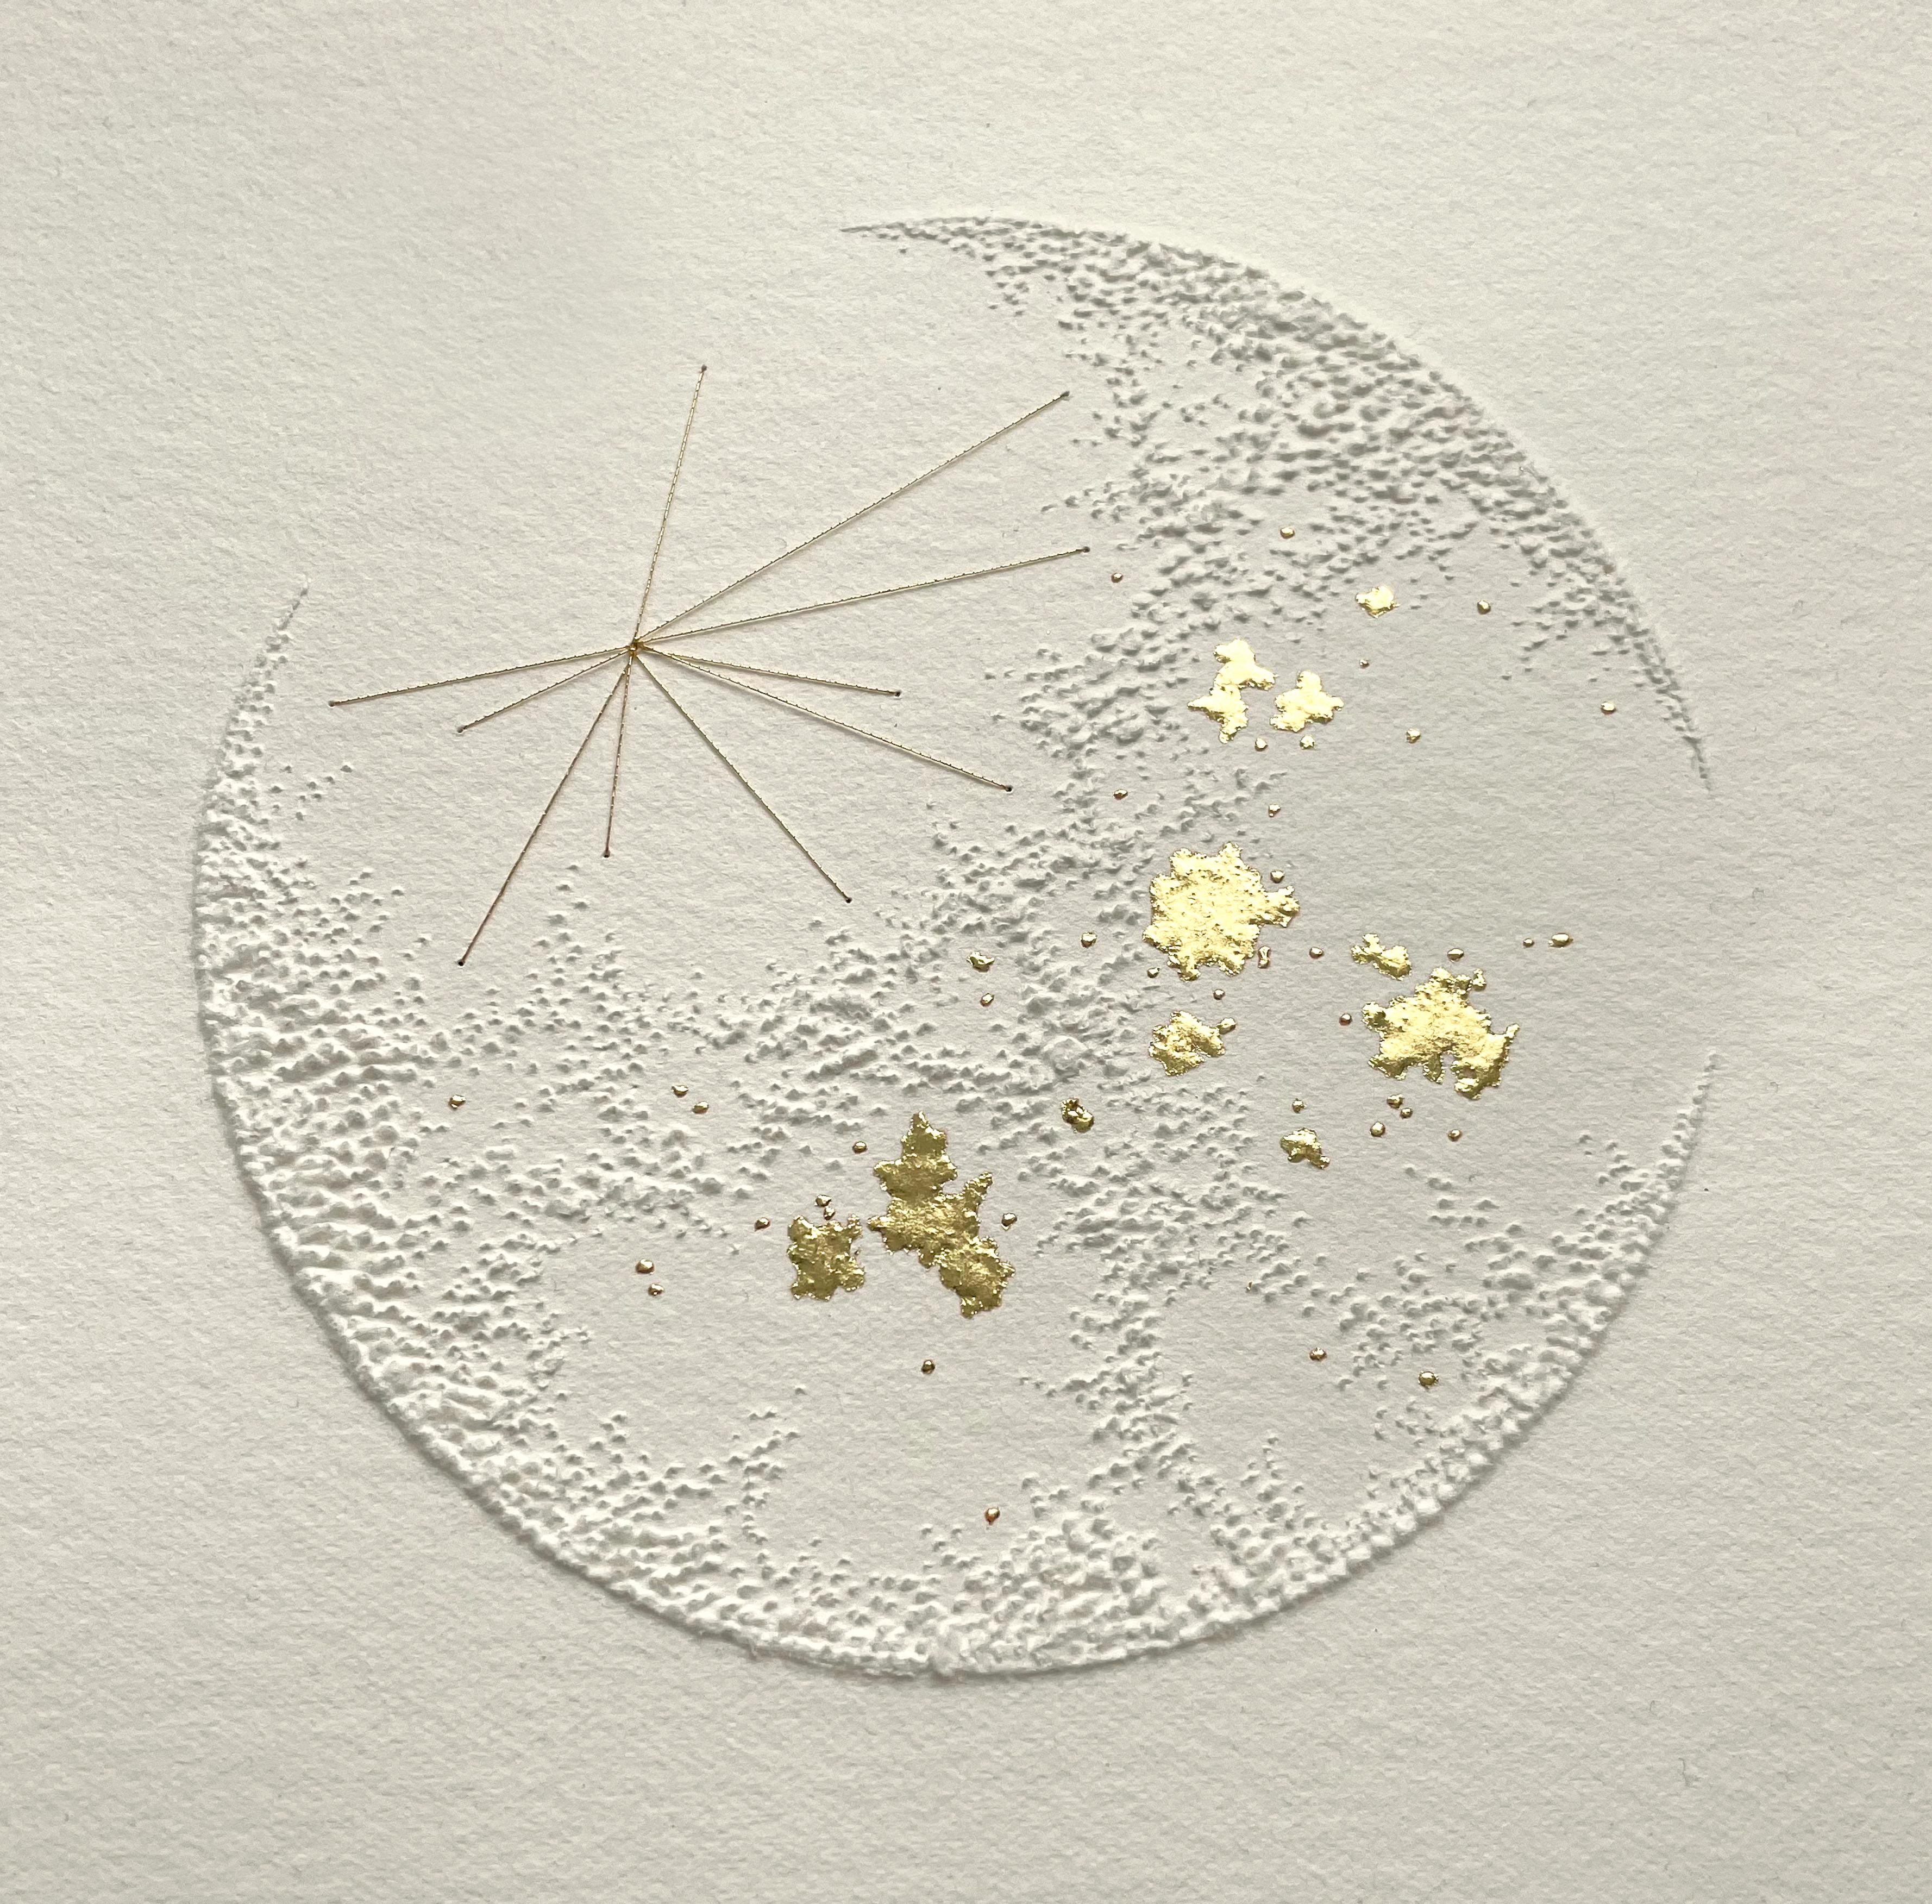 Moon 3- white 3D abstract circle with gold leaves. thread and pulled paper fiber - Abstract Geometric Sculpture by Antonin Anzil